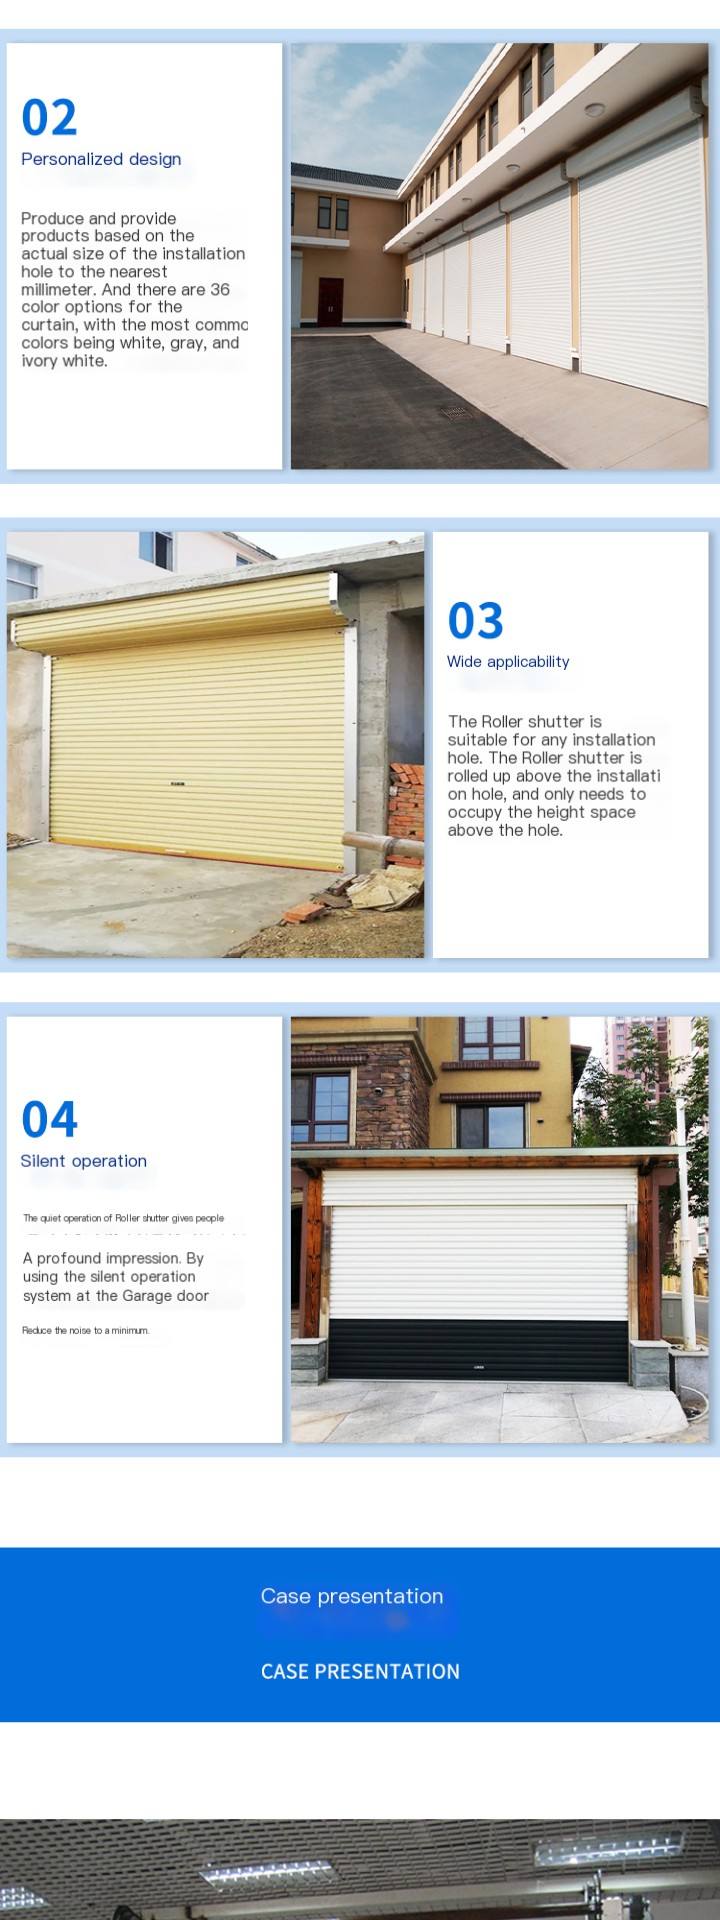 Zhongyi warehouse aluminum alloy Roller shutter with complete specifications supports customization and easy maintenance